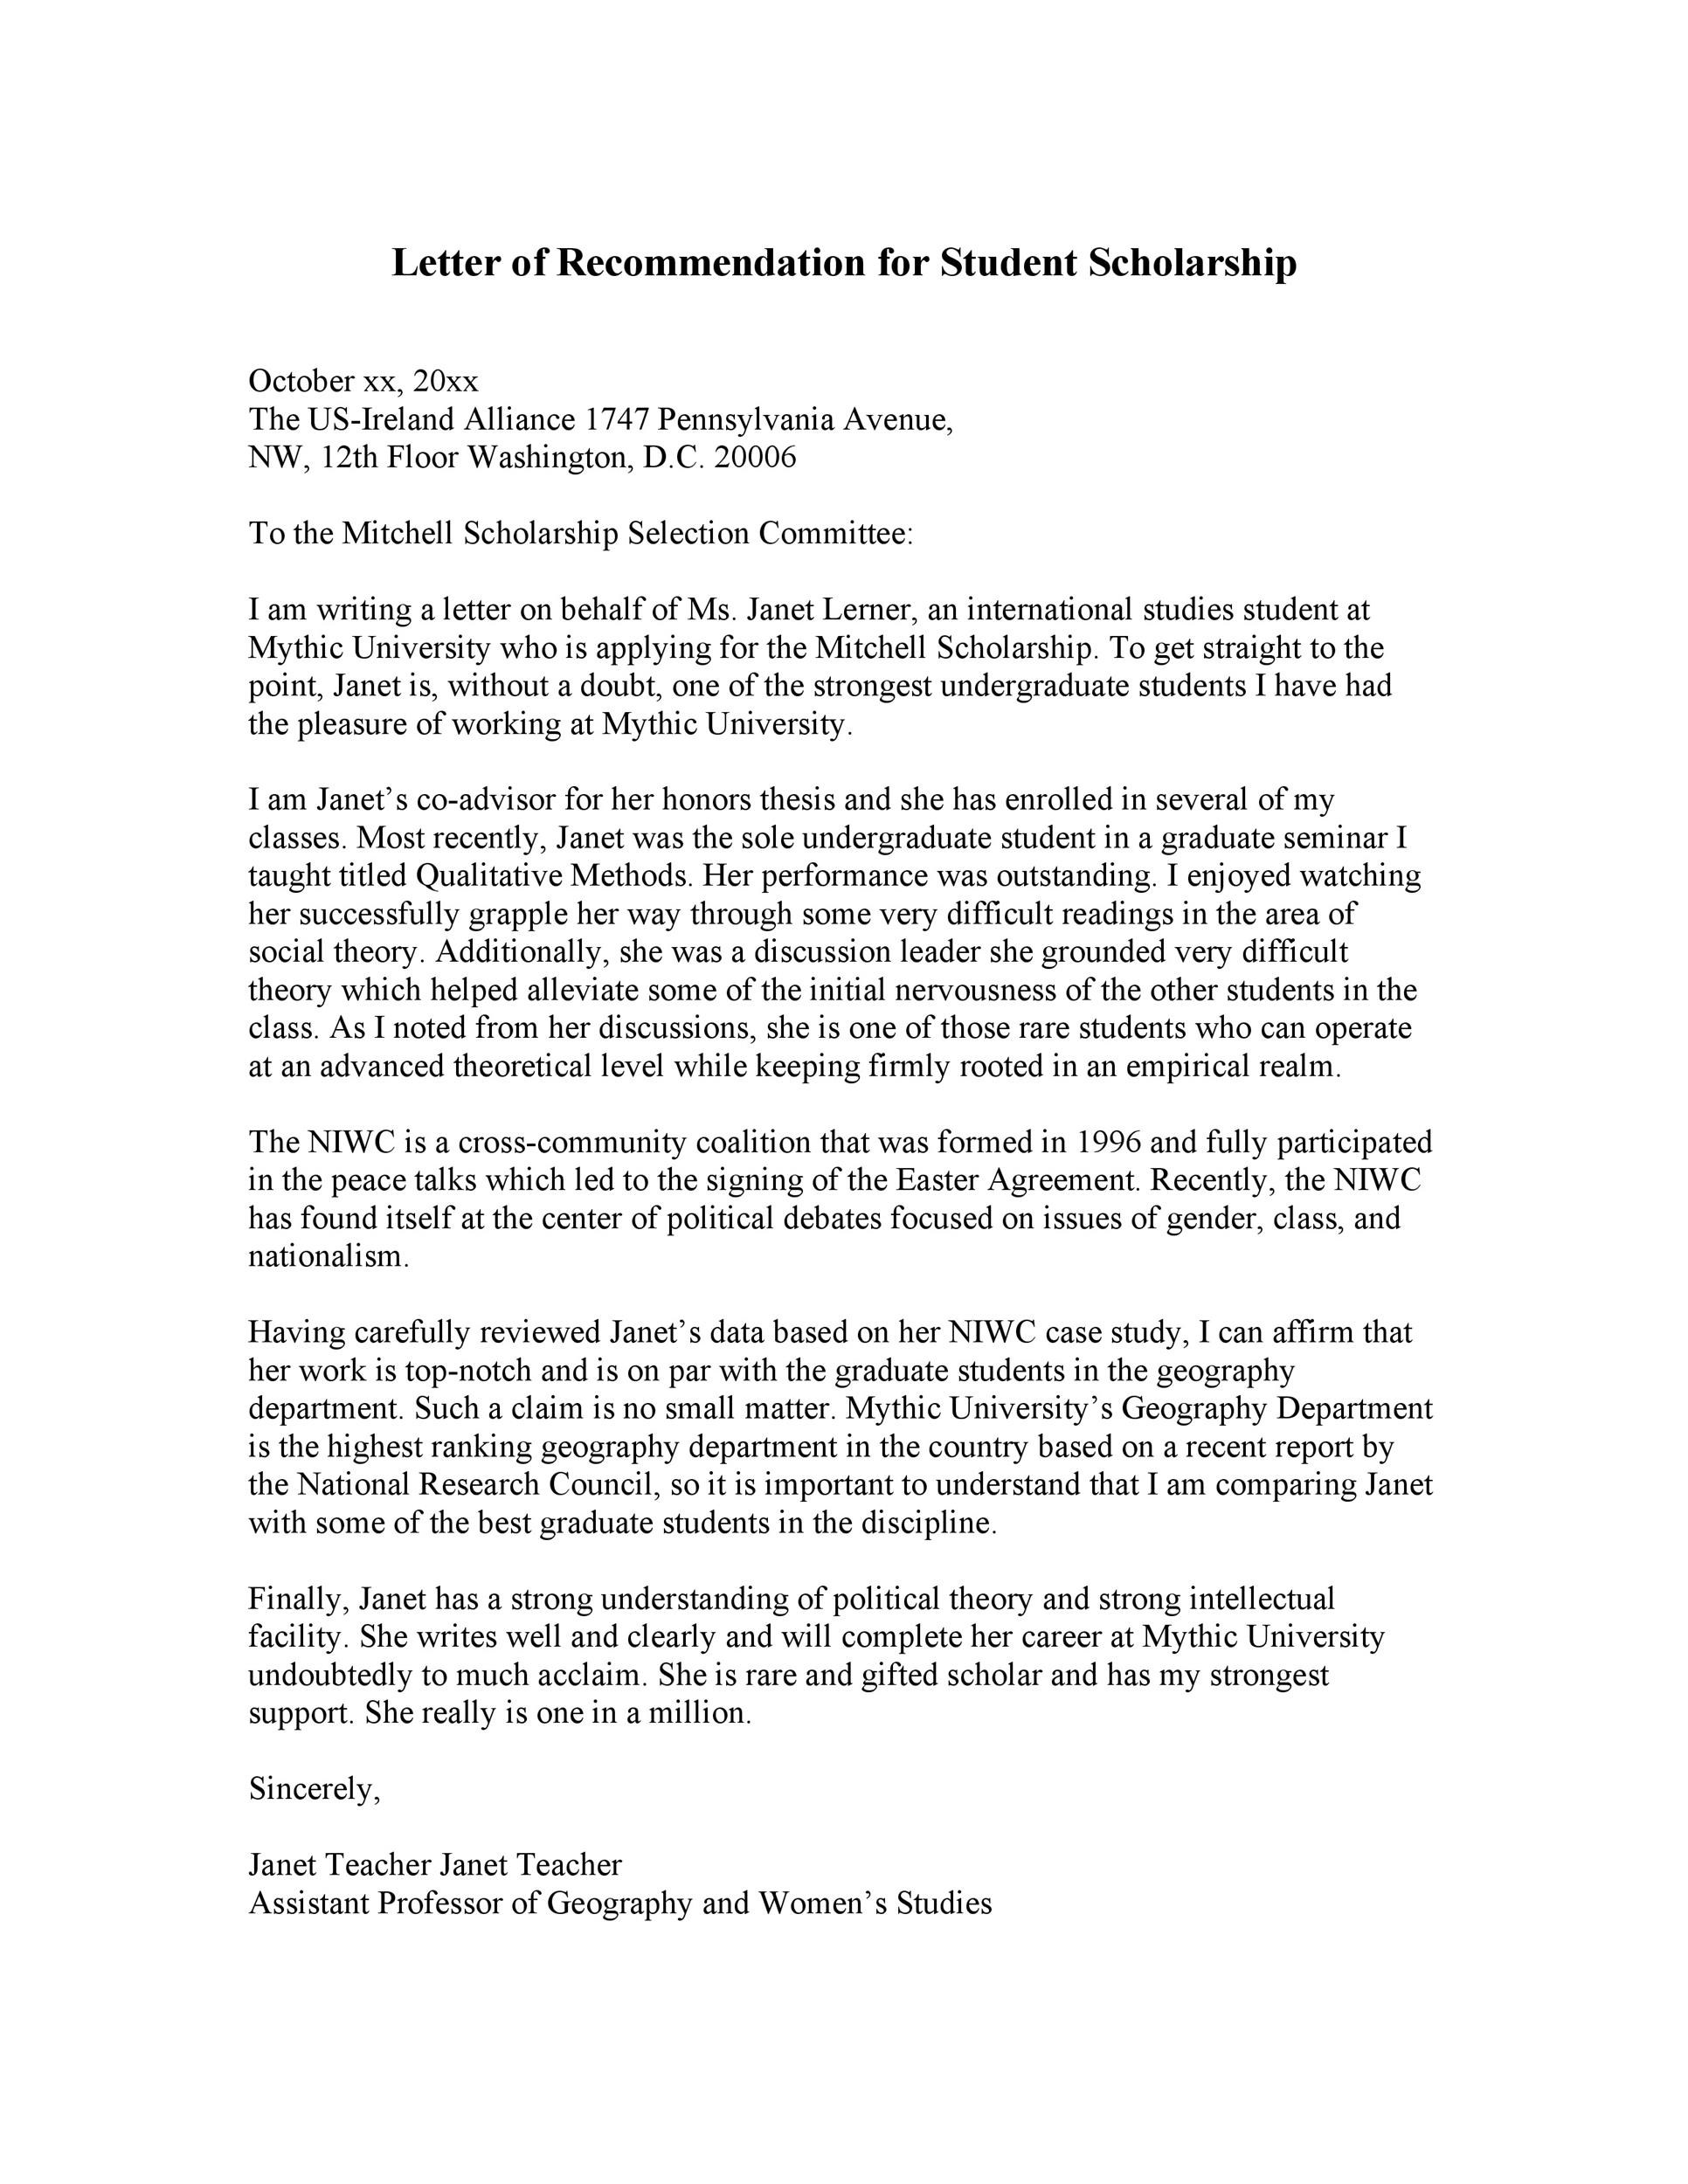 Scholarships Letter Of Recommendation Examples from templatelab.com